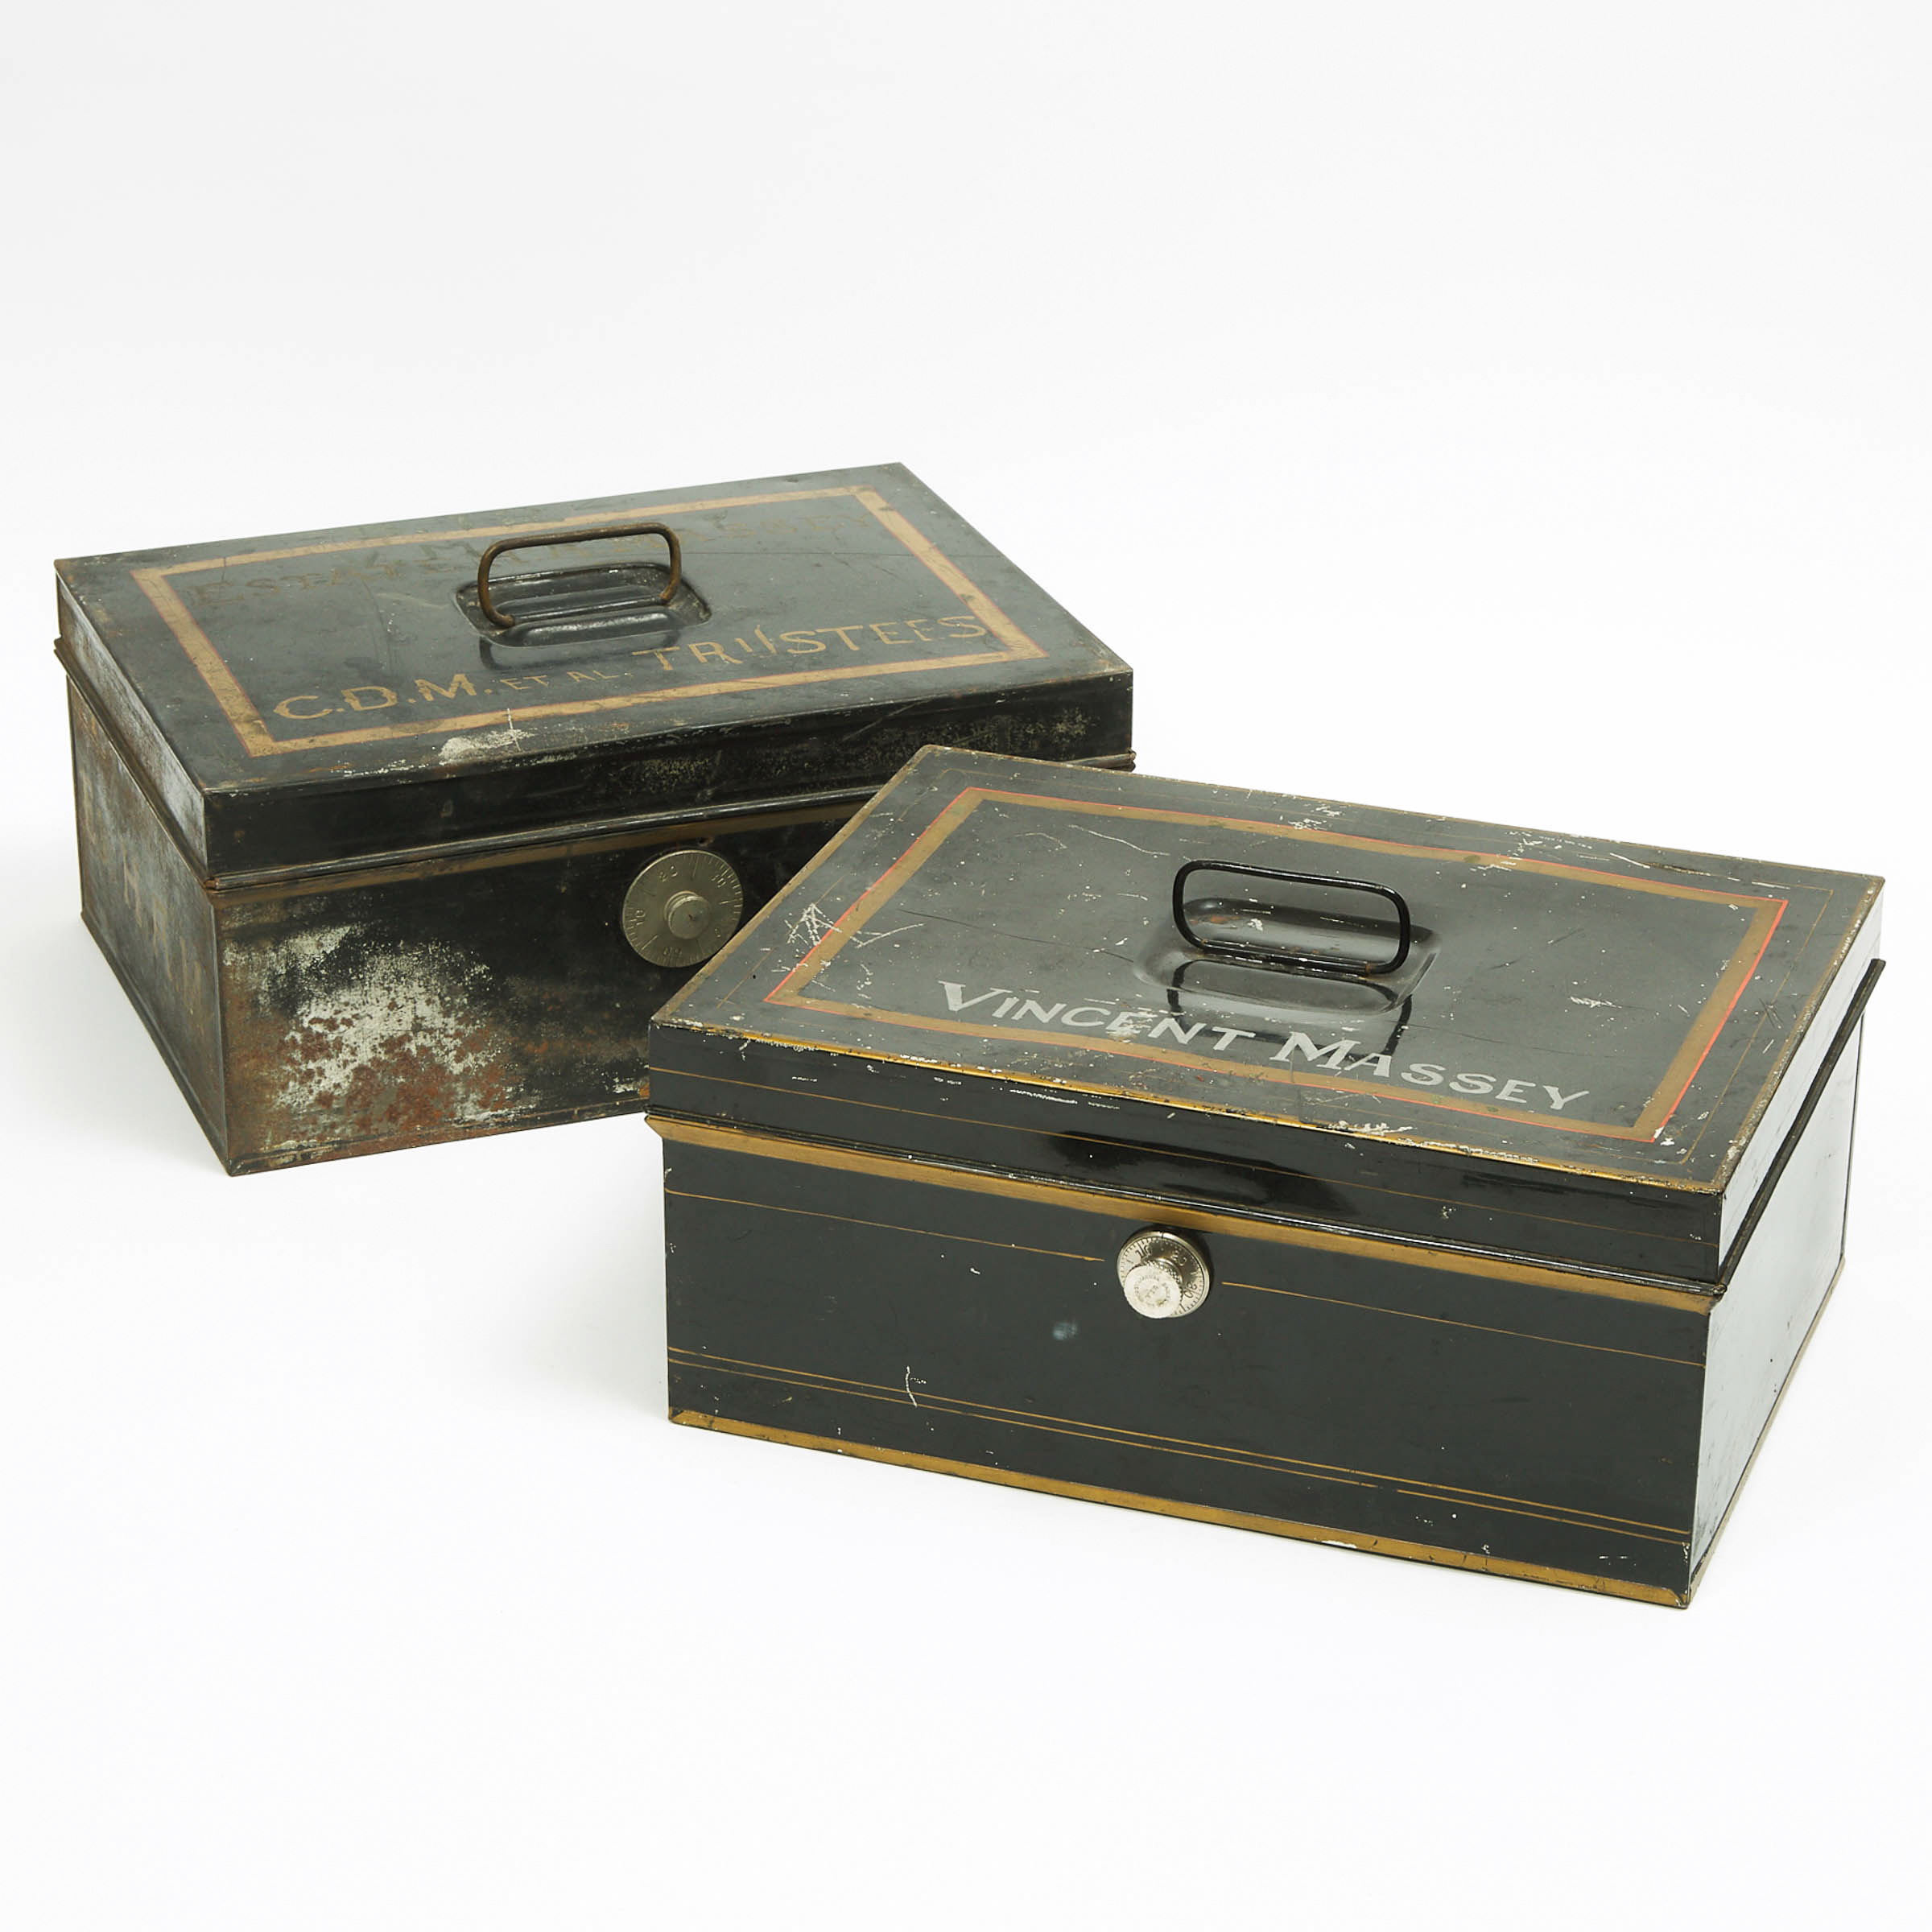 Two Massey Family Tole Dispatch Boxes, 19th and mid 20th centuries